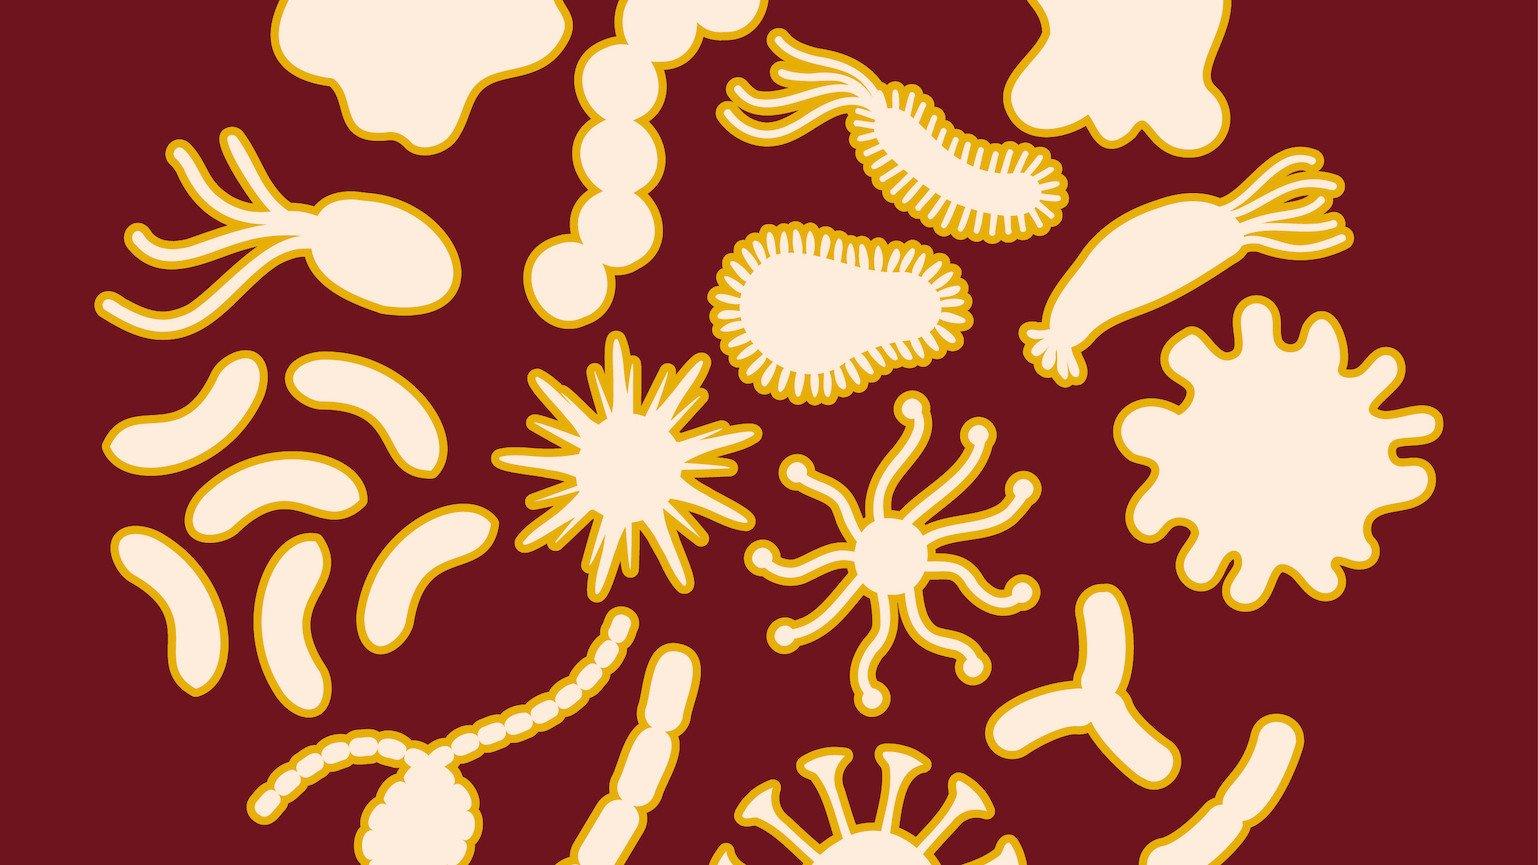 Illustration of yellow microbes against a red background.